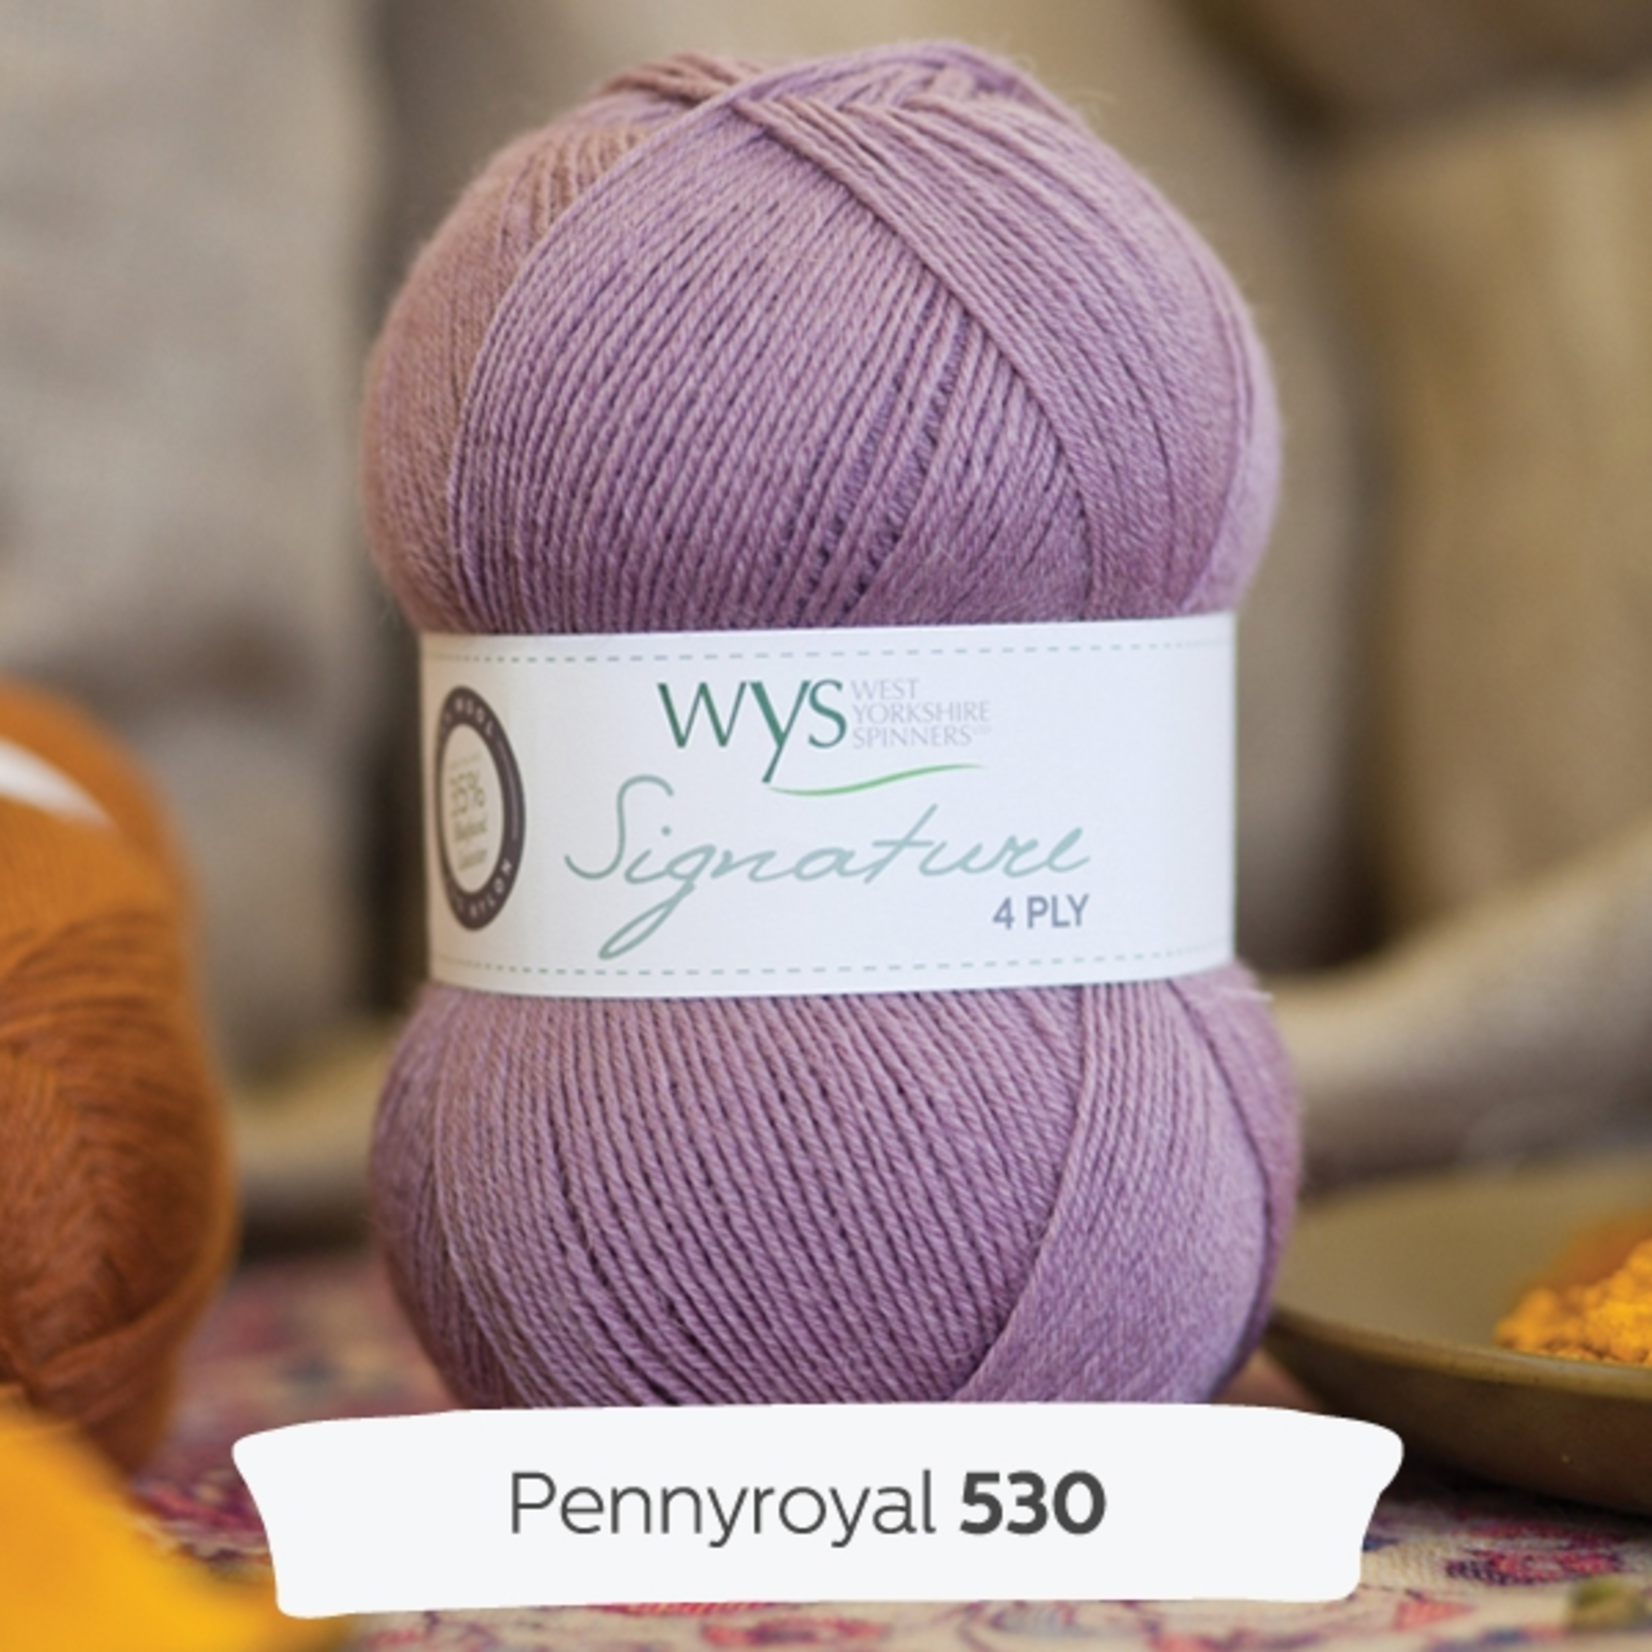 West Yorkshire Spinners Signature 4-Ply by West Yorkshire Spinners